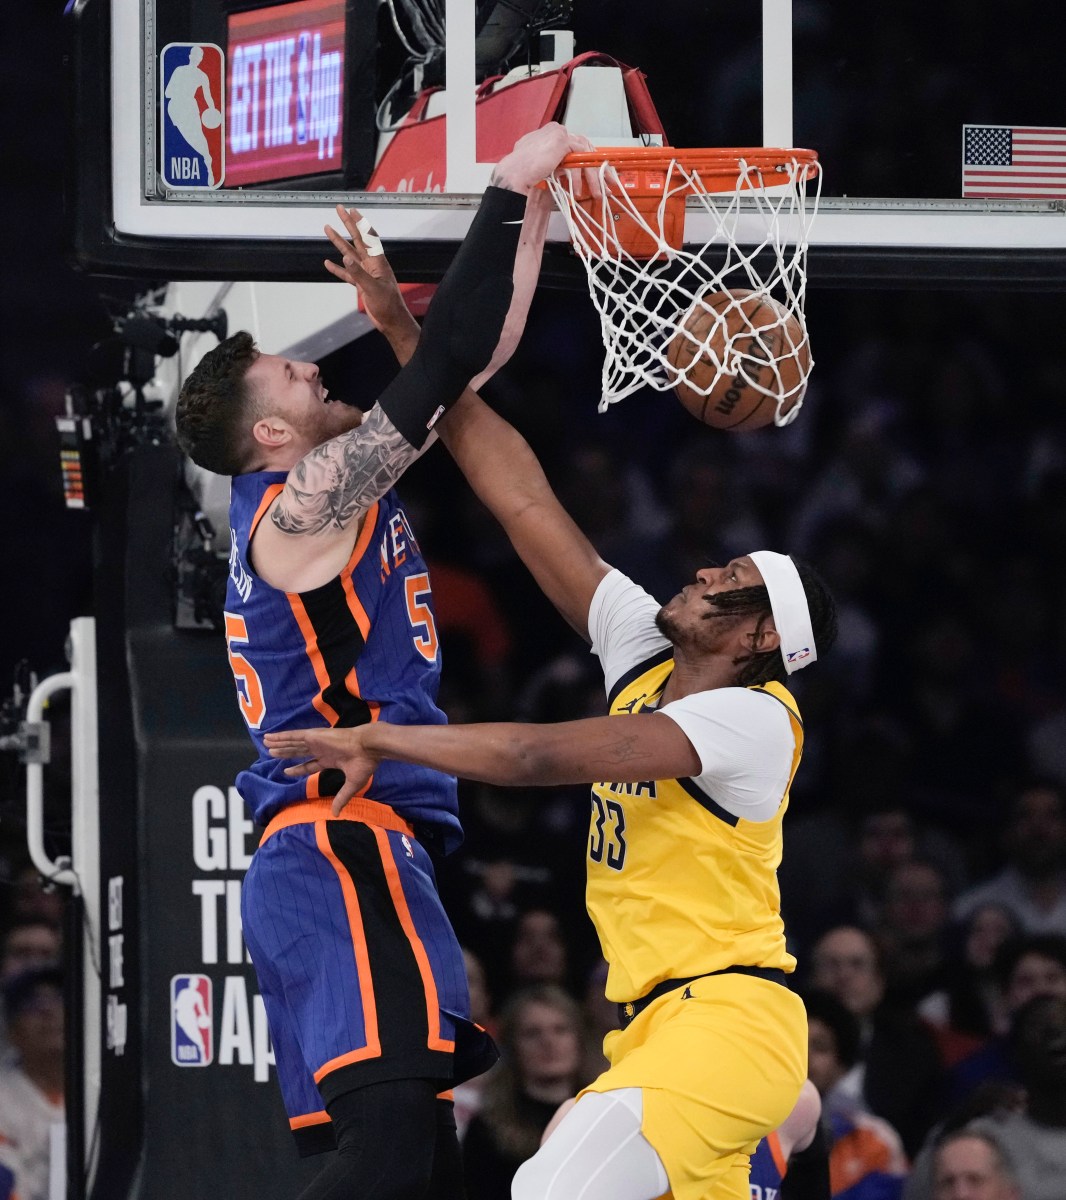 New York Knicks' Isaiah Hartenstein dunks the ball in front of Indiana Pacers' Myles Turner